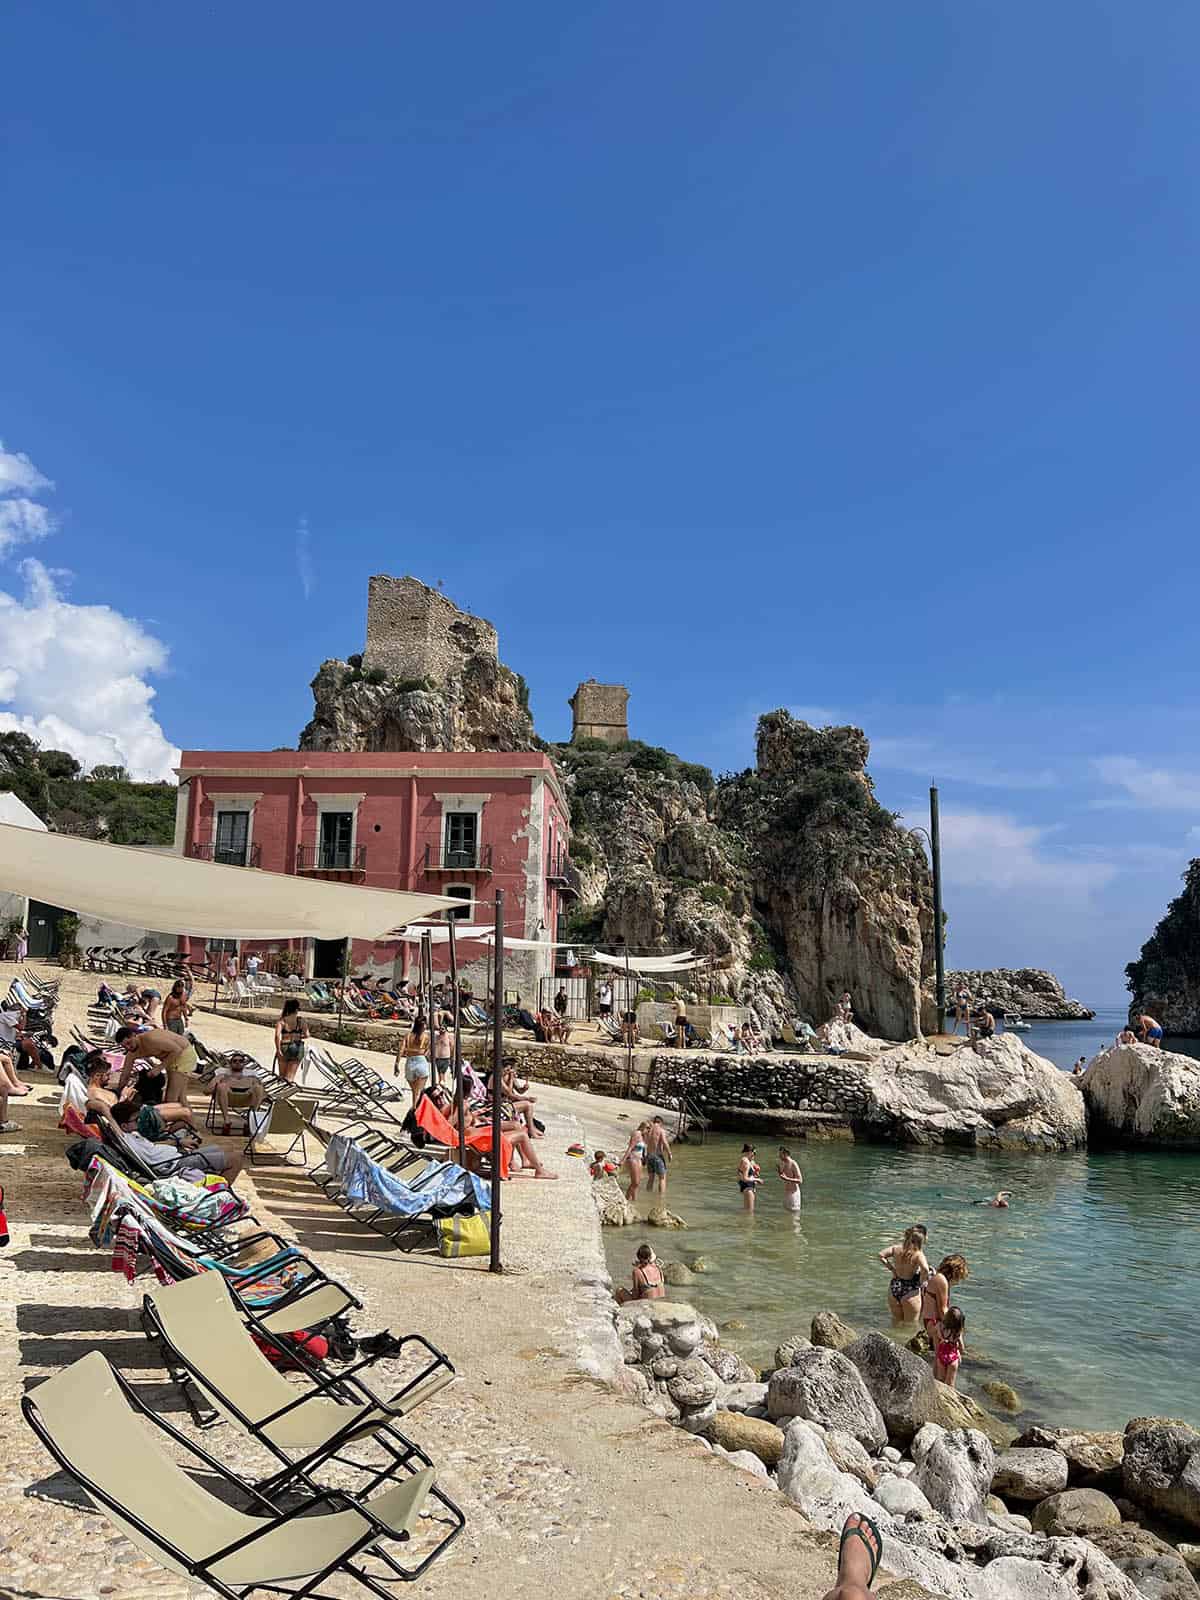 An image of the Tonnara Di Scopello on a sunny day